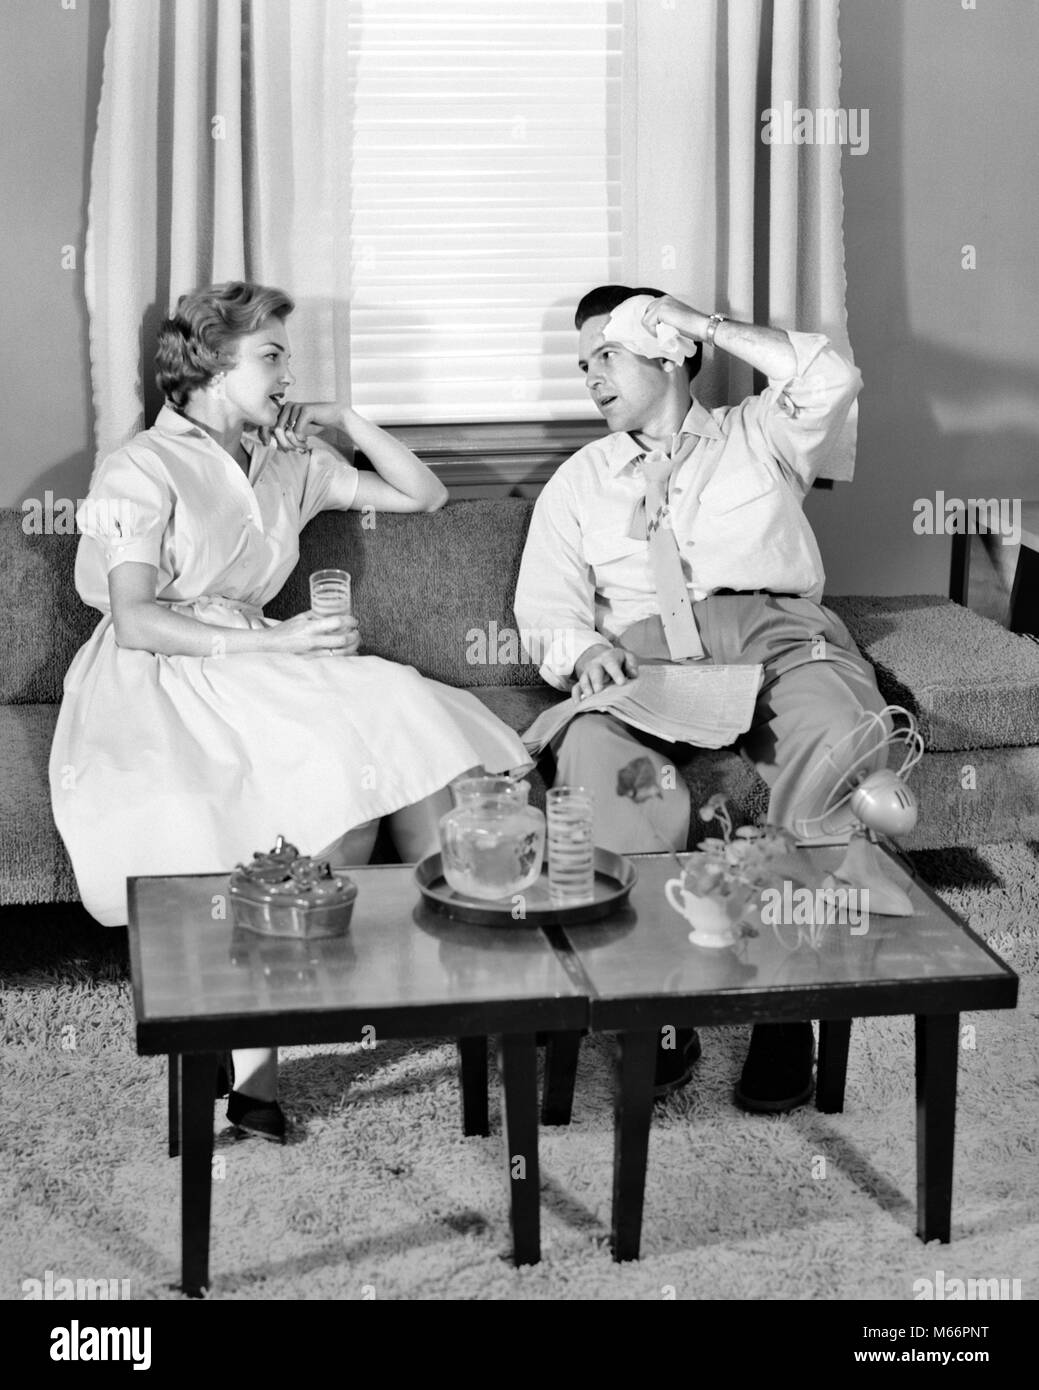 1950s COUPLE SITTING ON LIVING ROOM COUCH TRYING TO COOL DOWN DRINKING ICED DRINK BEFORE FAN ON COFFEE TABLE - s5601 HAR001 HARS COPY SPACE FULL-LENGTH LADIES FAN COUPLES INDOORS SWEAT ICED NOSTALGIA SWEATING SUMMERTIME 30-35 YEARS 35-40 YEARS BEFORE TEMPERATURE WIVES LIVING ROOM TRYING UNCOMFORTABLE SOLUTIONS COOL DOWN MALES MID-ADULT MID-ADULT MAN MID-ADULT WOMAN B&W BLACK AND WHITE CAUCASIAN ETHNICITY COFFEE TABLE HEAT WAVE HUMID OLD FASHIONED OPPRESSIVE OVER HEATED OVERHEATED PERSONS PERSPIRING SWELTERING WIPING FACE Stock Photo